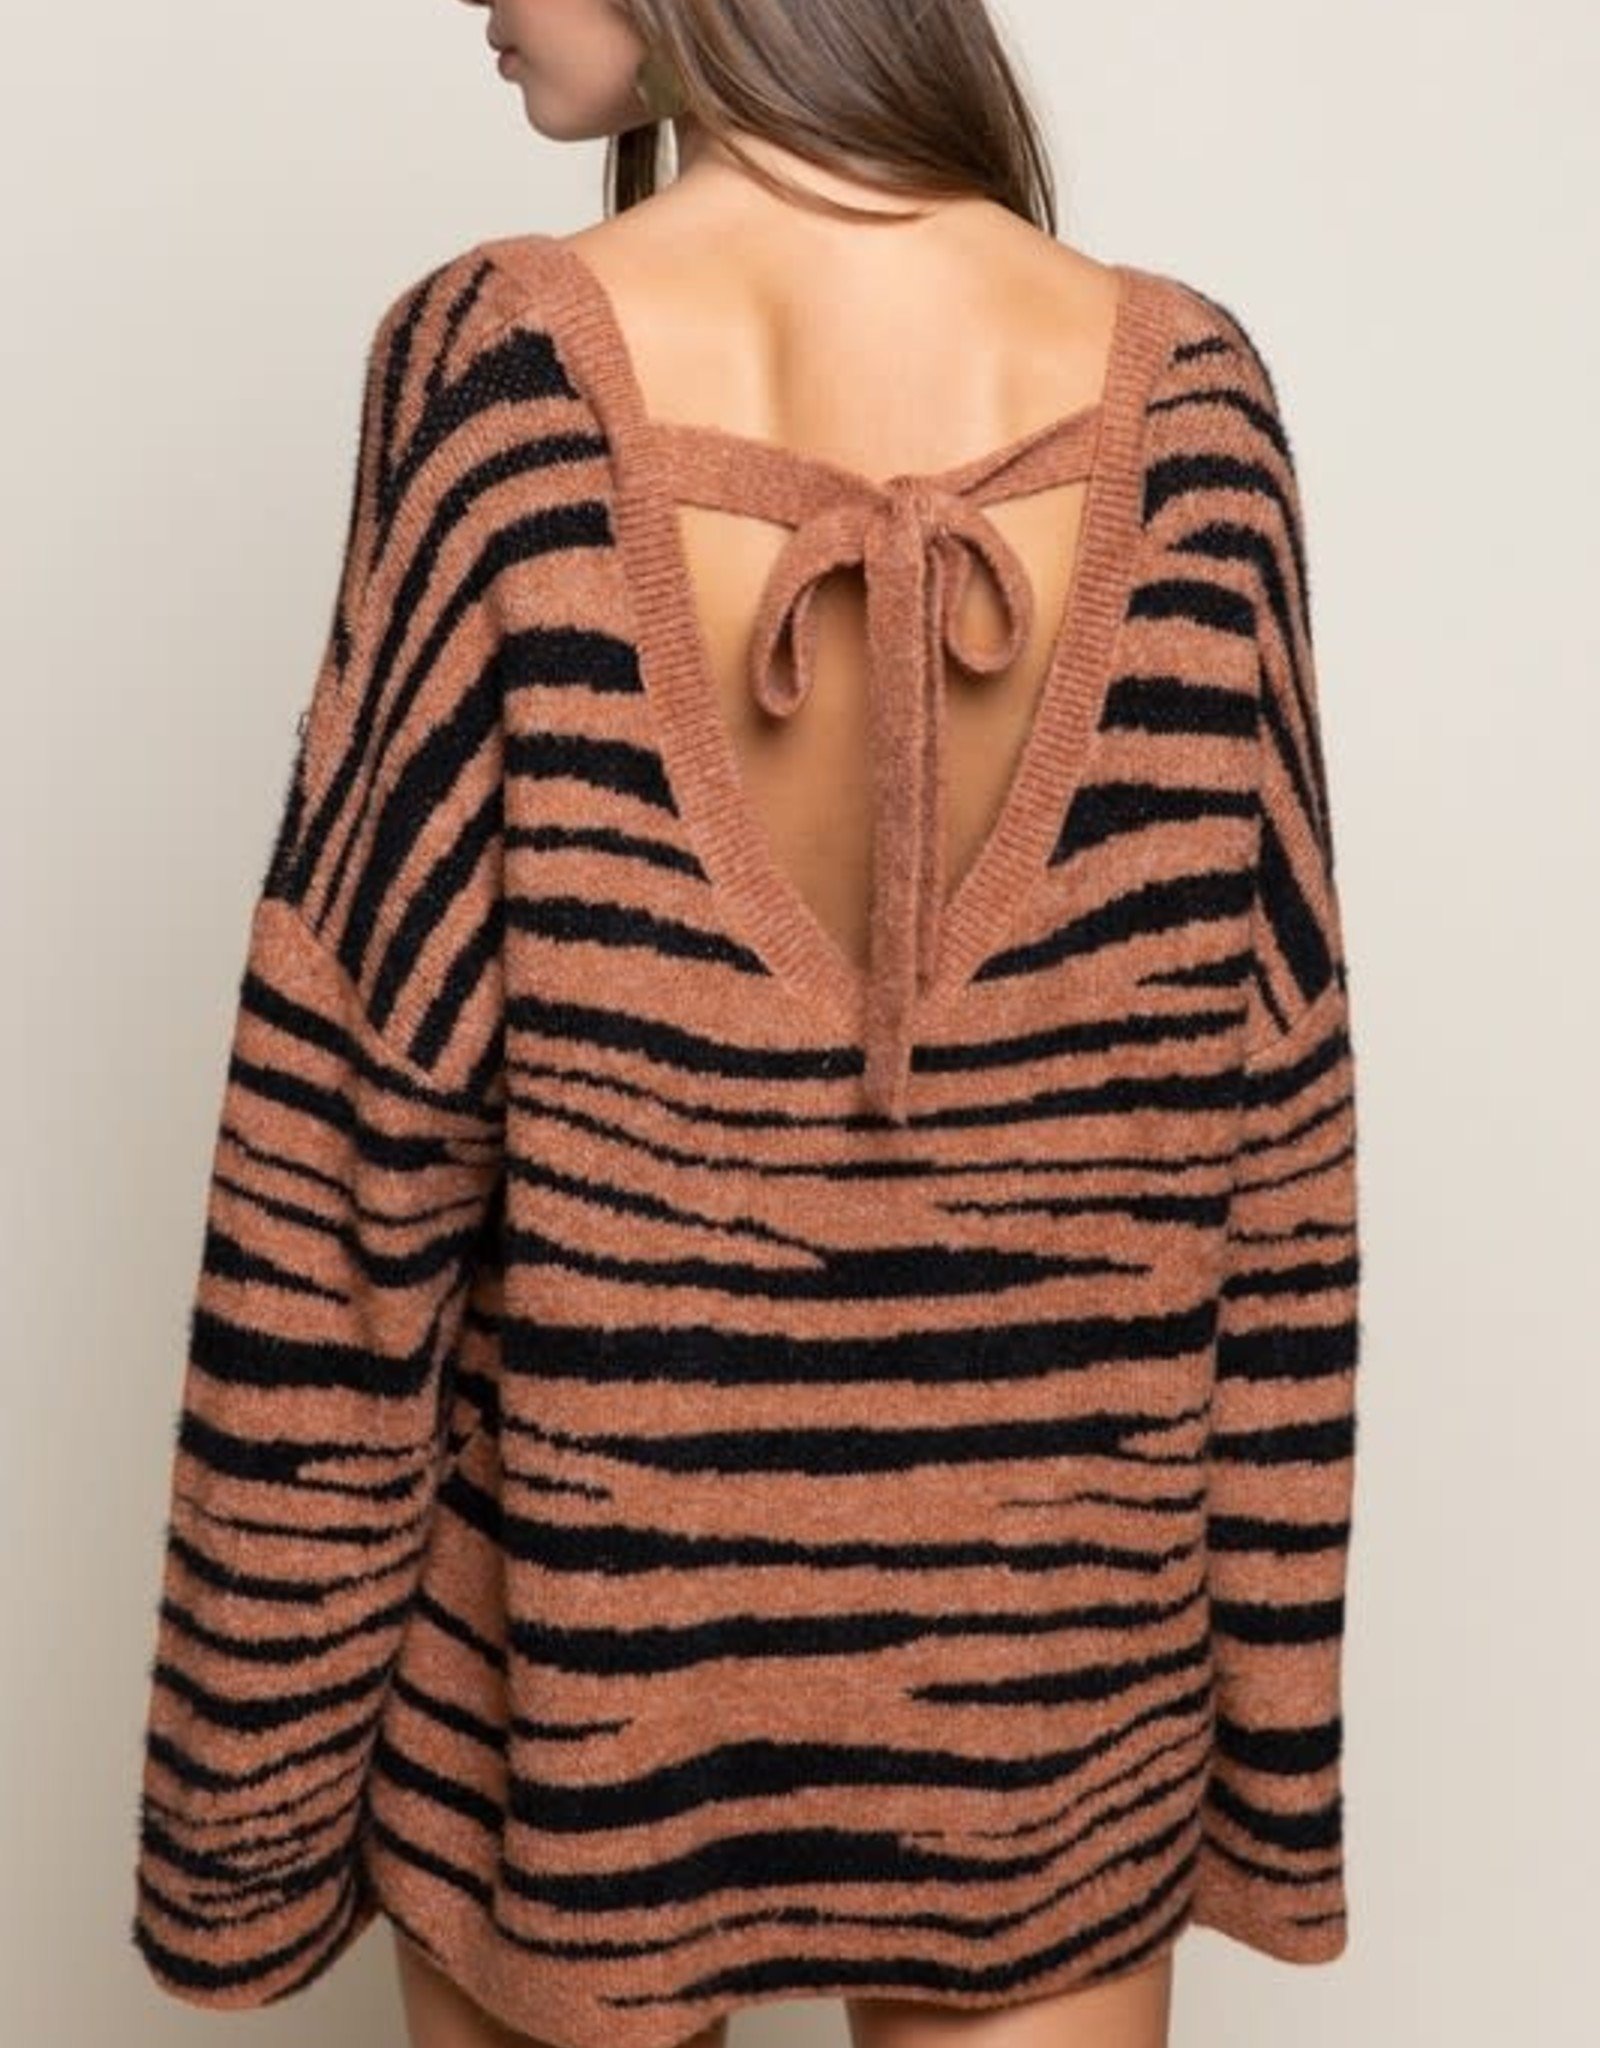 Easy Tiger Sweater